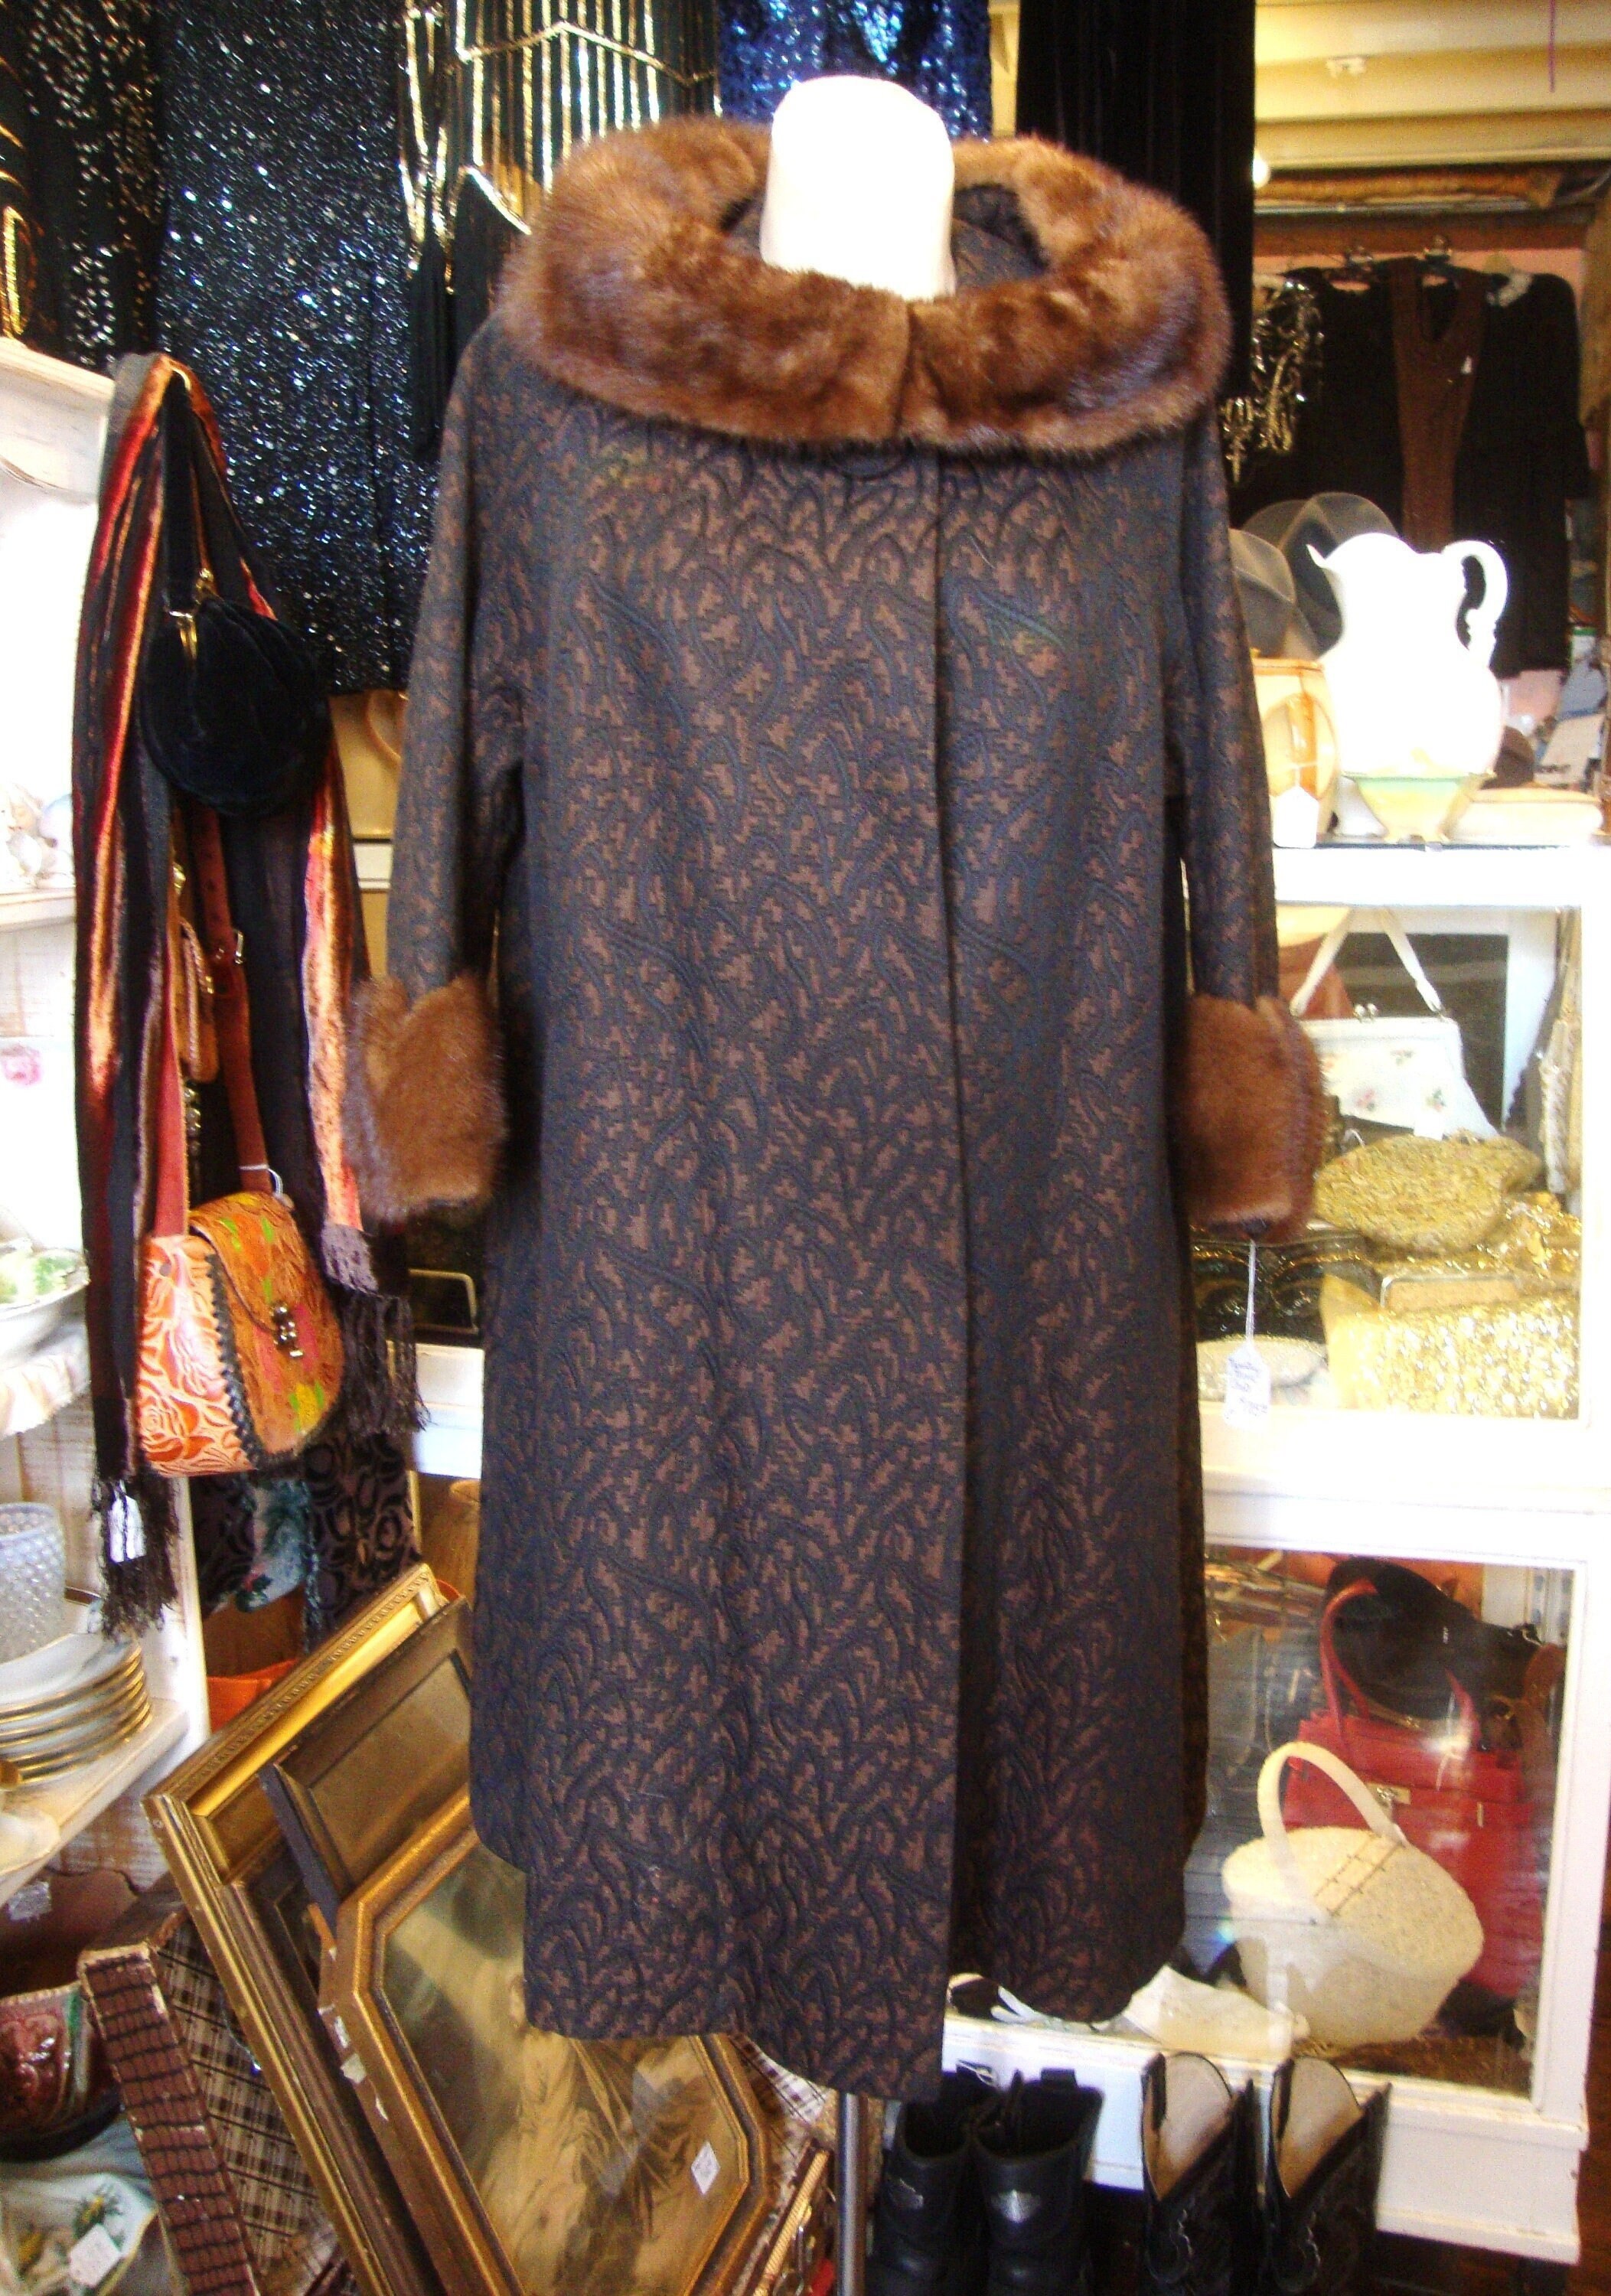 1960s Coats and Jackets Vintage 1950s 1960s Black  Brown Tapestry Wool Swing A-Line Trapeze Coat With Mink Collar CuffsSize Small To Medium $179.00 AT vintagedancer.com